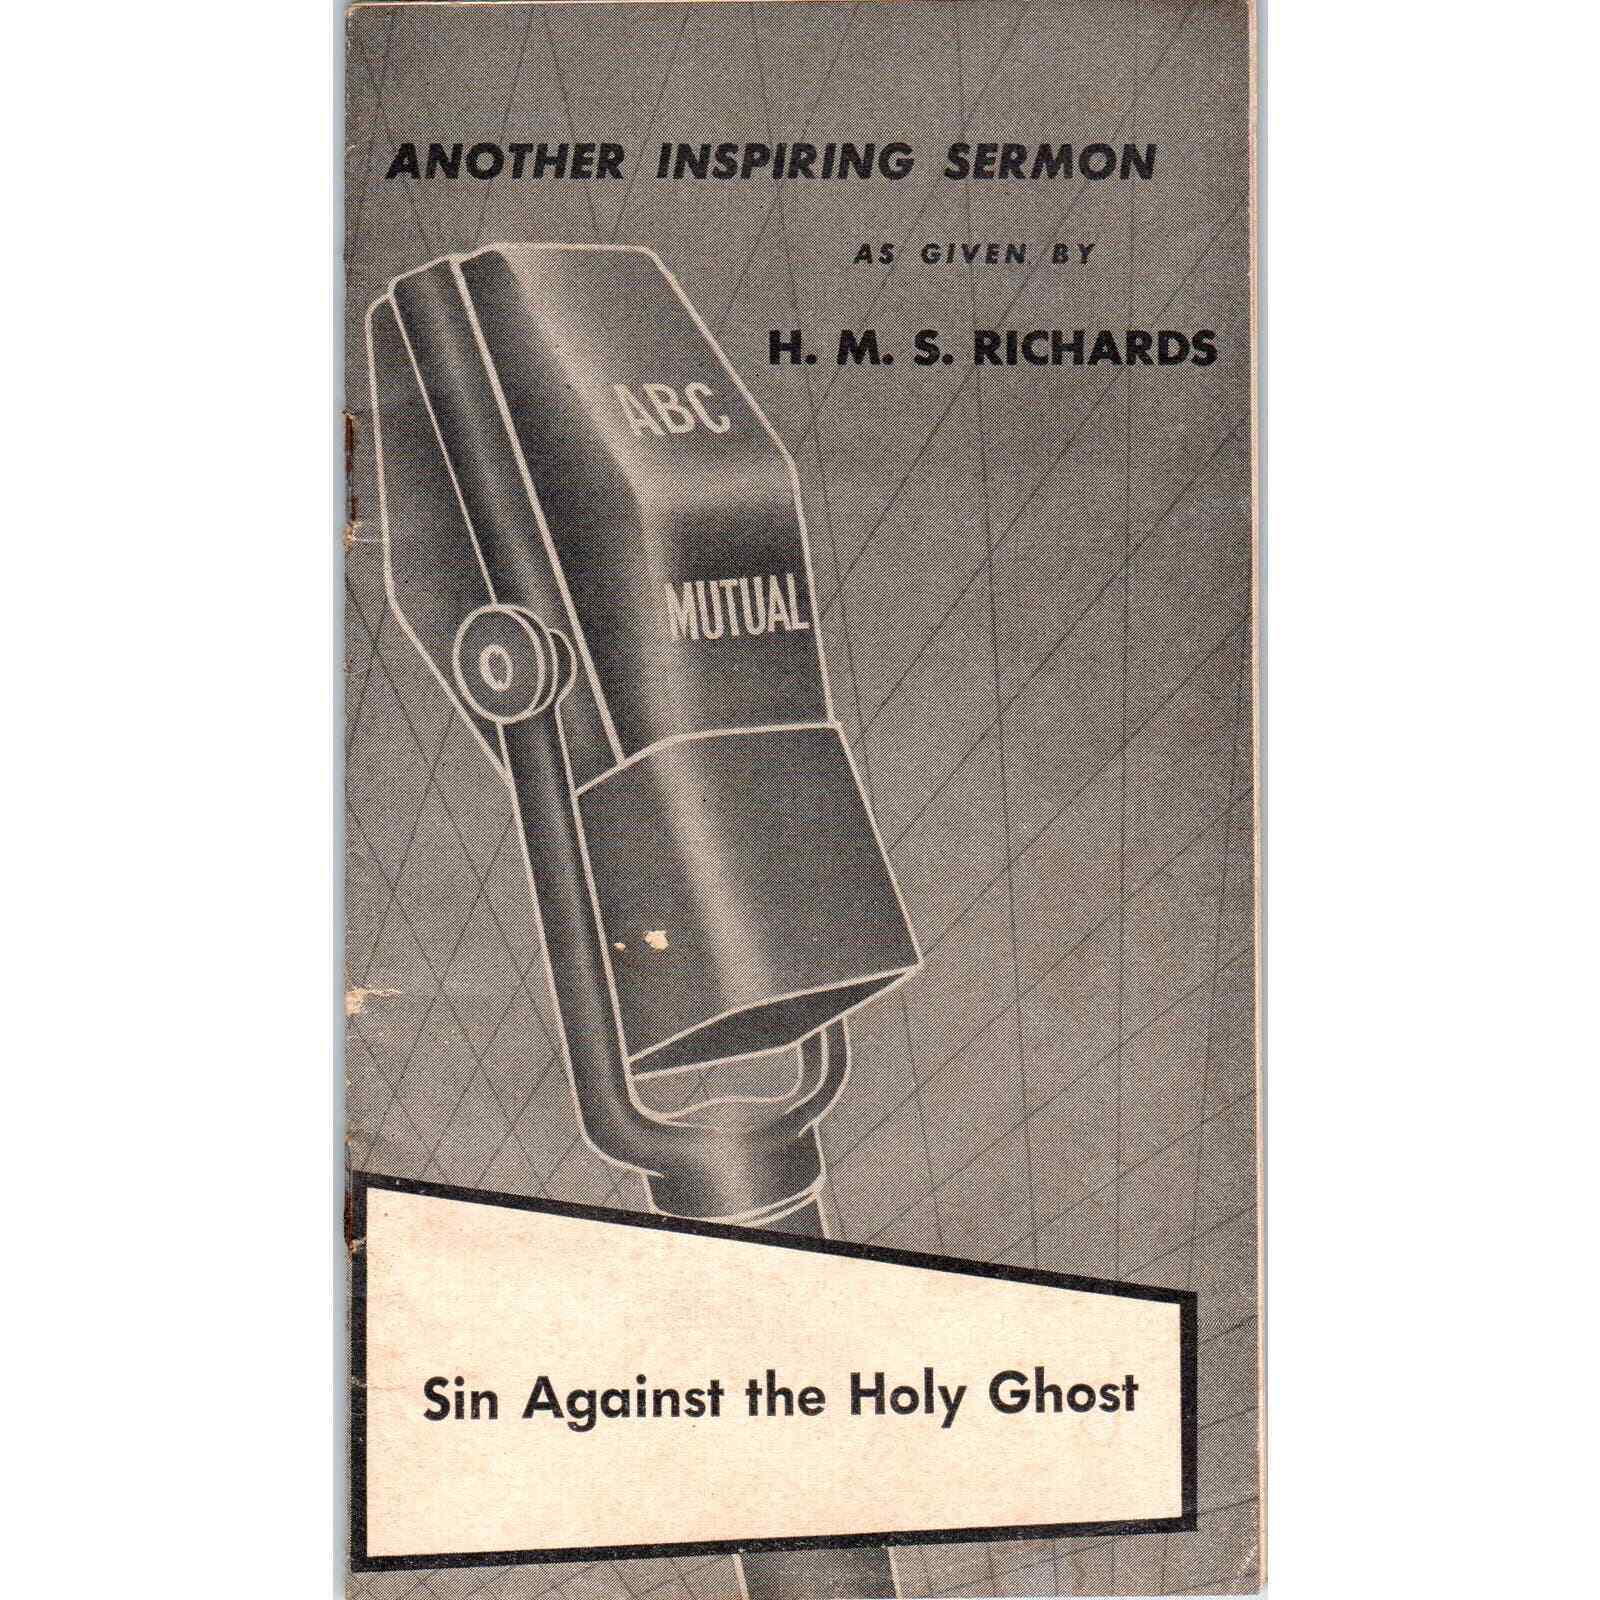 1940s Another Inspiring Sermon by H.M.S. Richards ABC Radio Booklet AF1-RR2